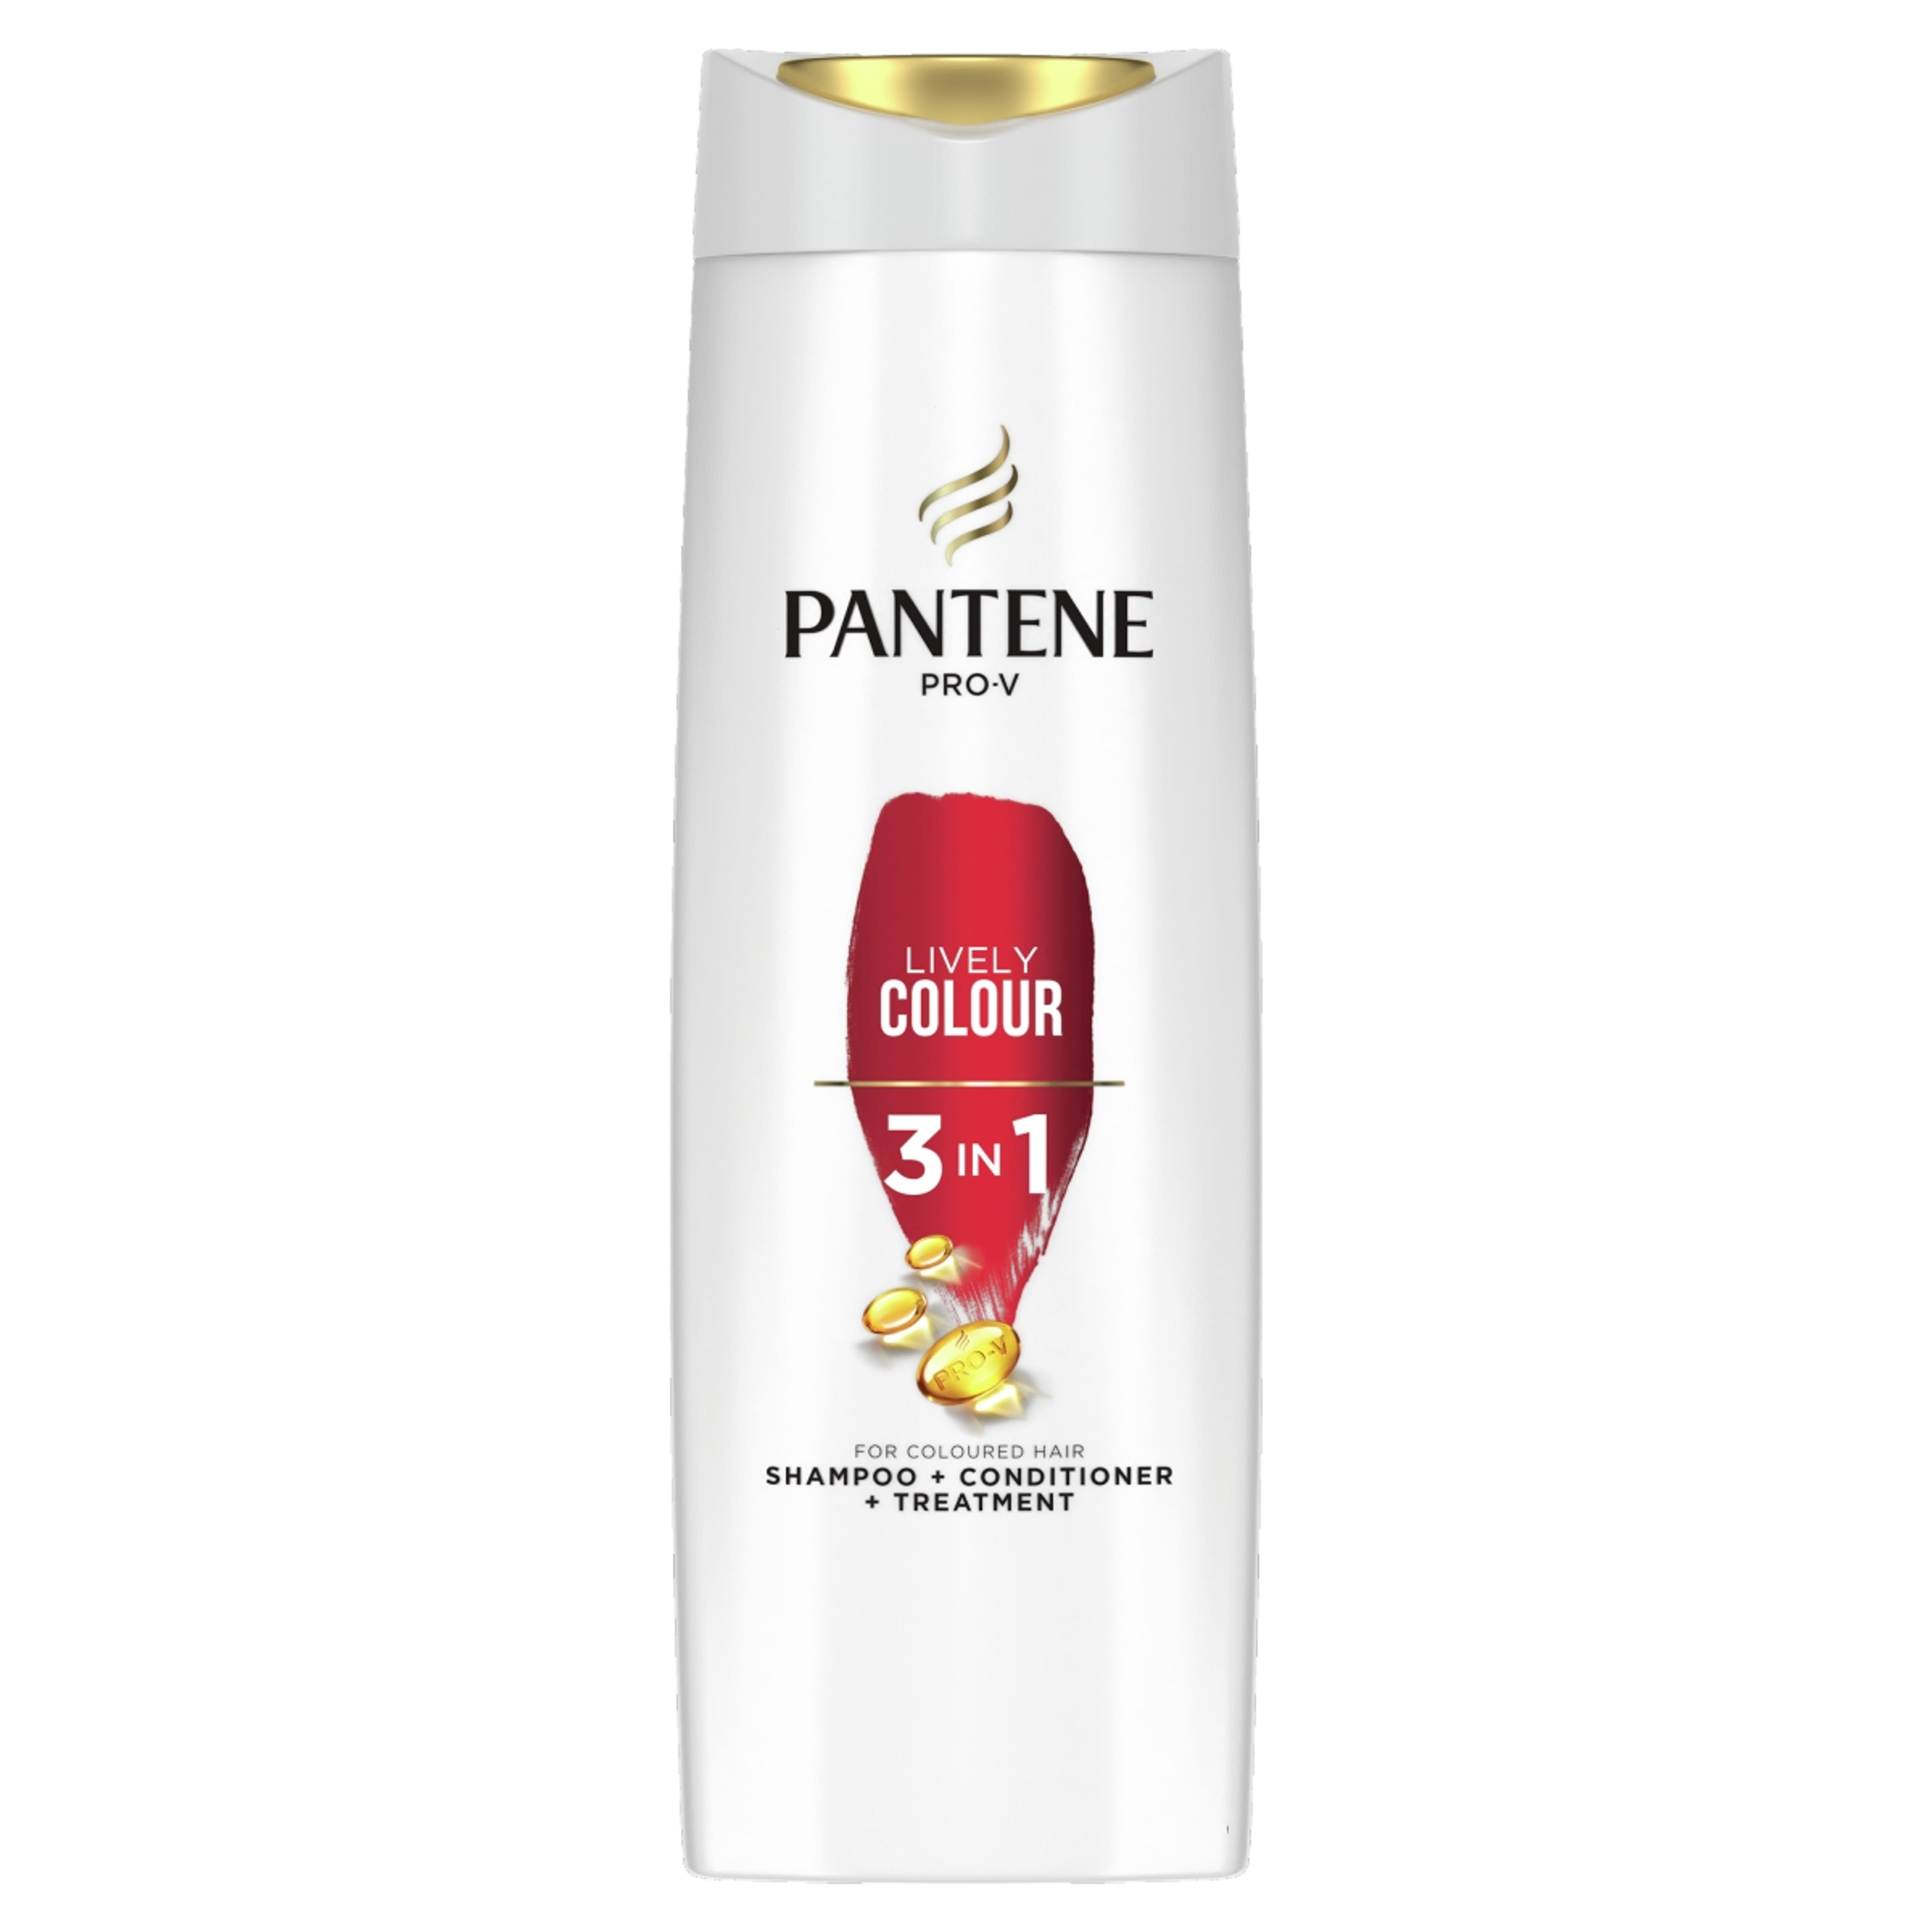 Pantene 3in1 Lively Color sampon - 360 ml